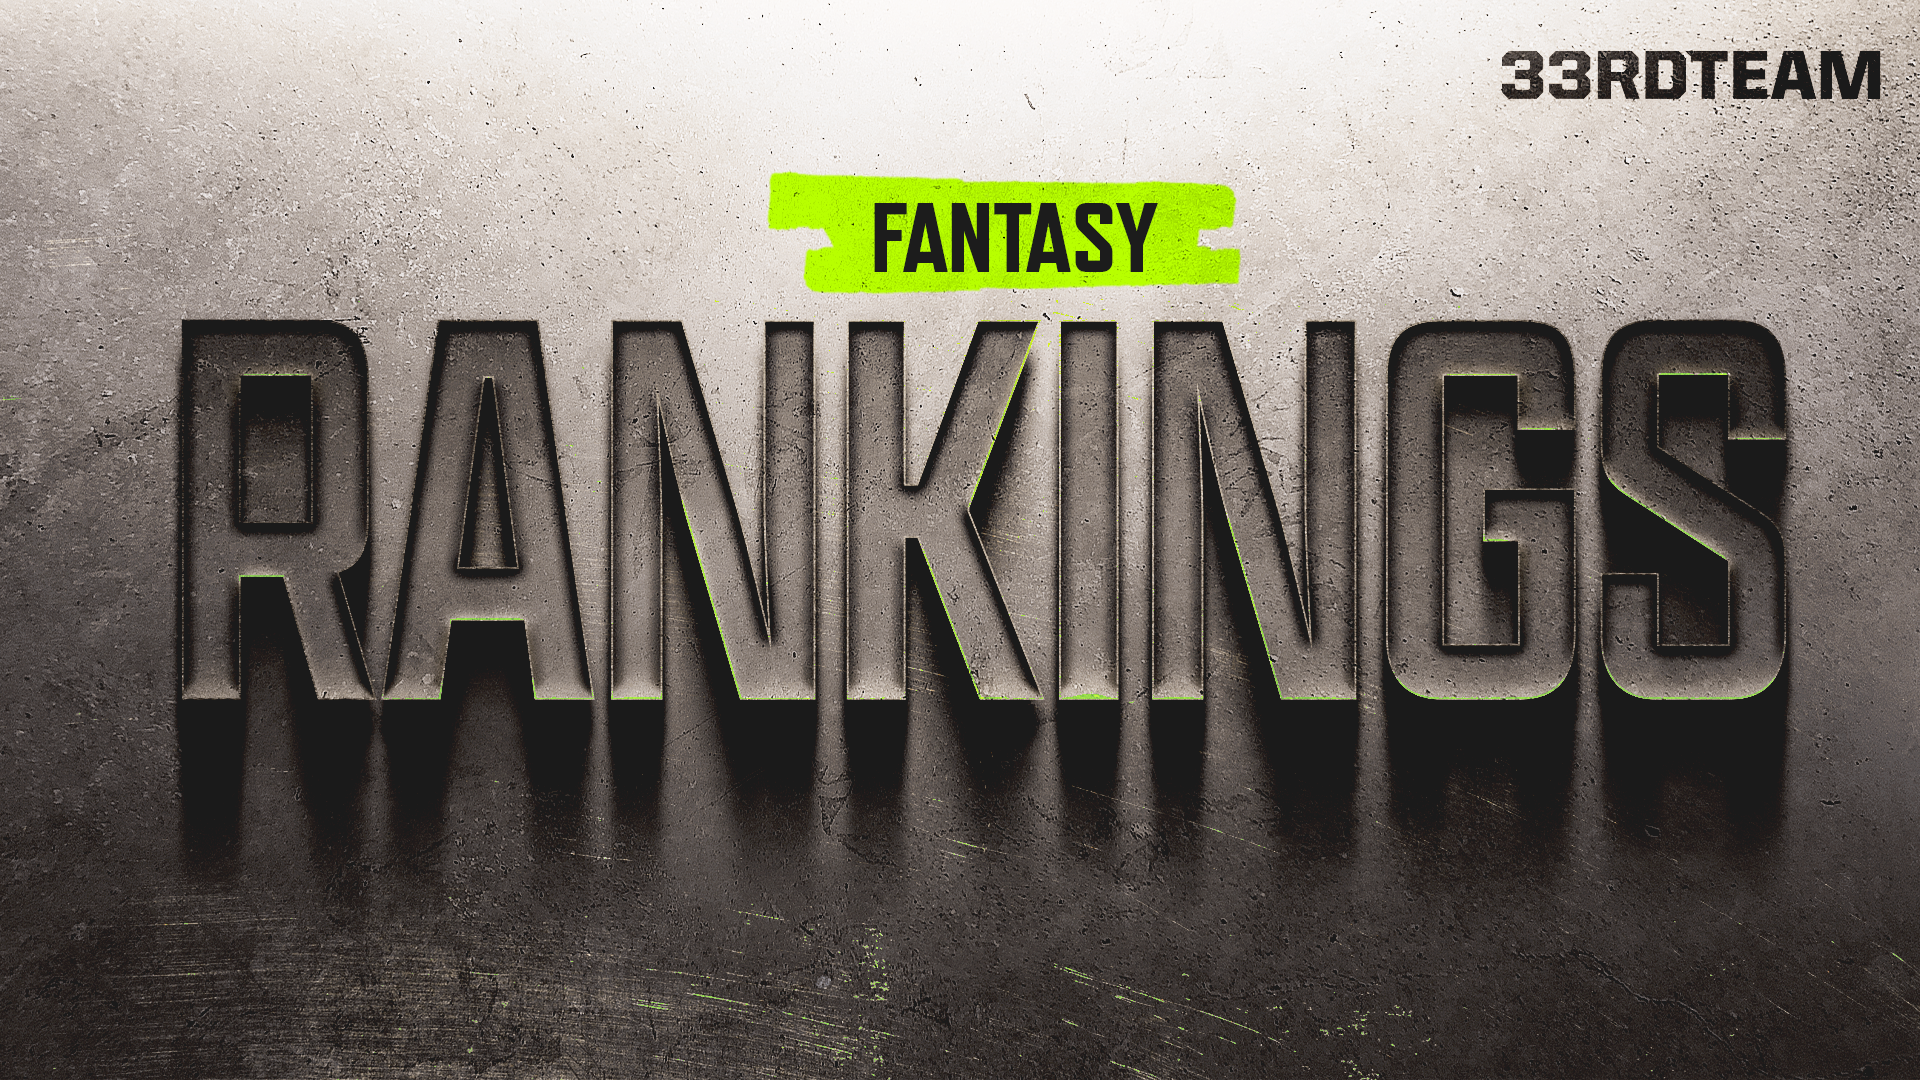 Tiered Fantasy Rankings and Player Write-Ups